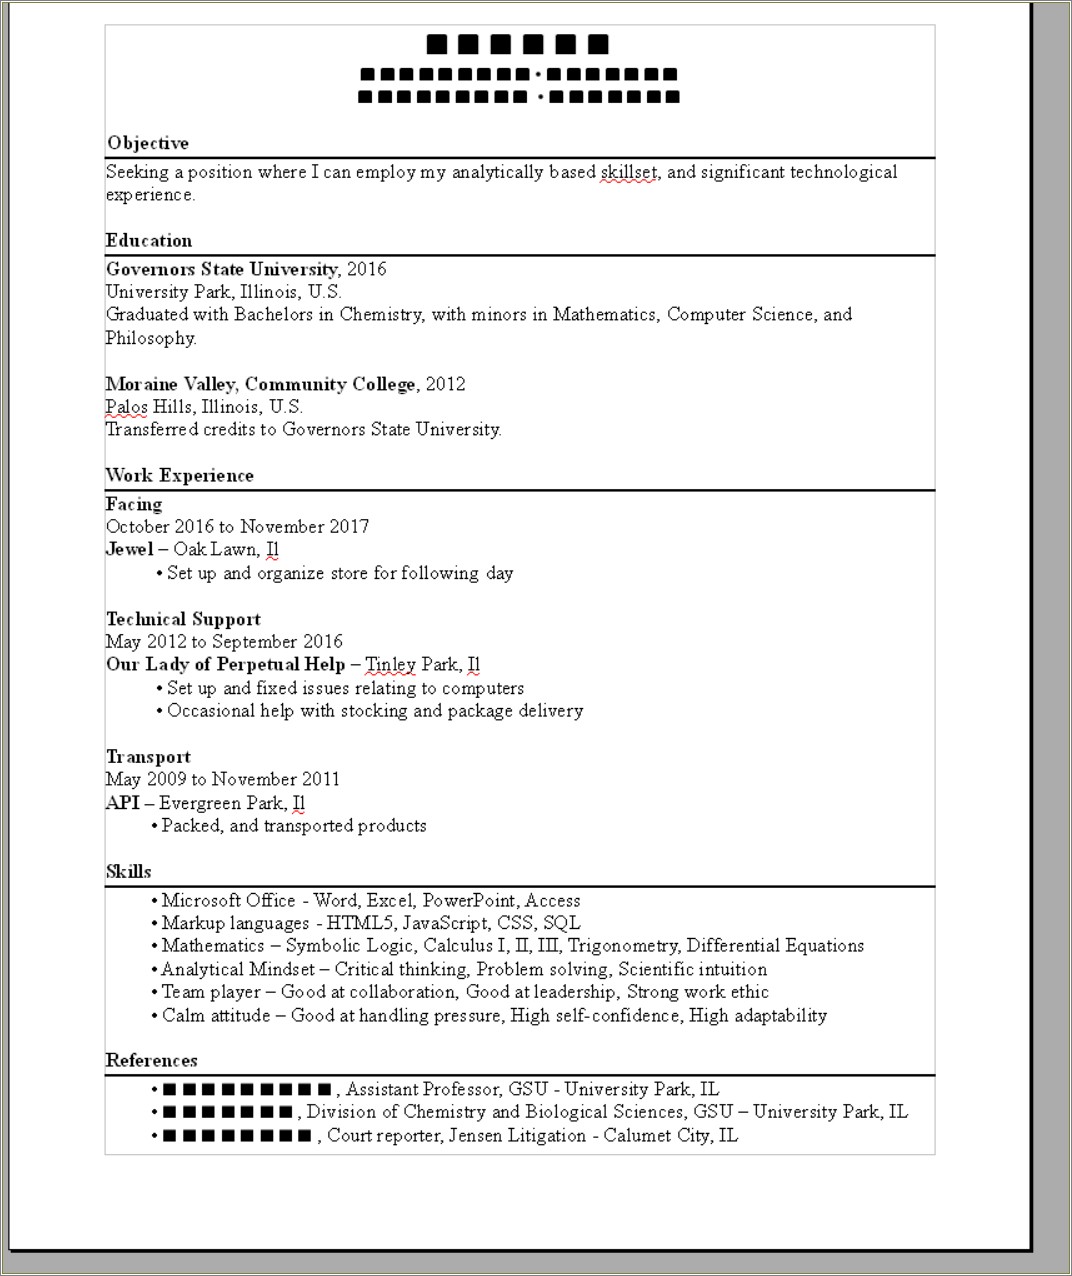 Must Have Words On Resume In Biological Sciences